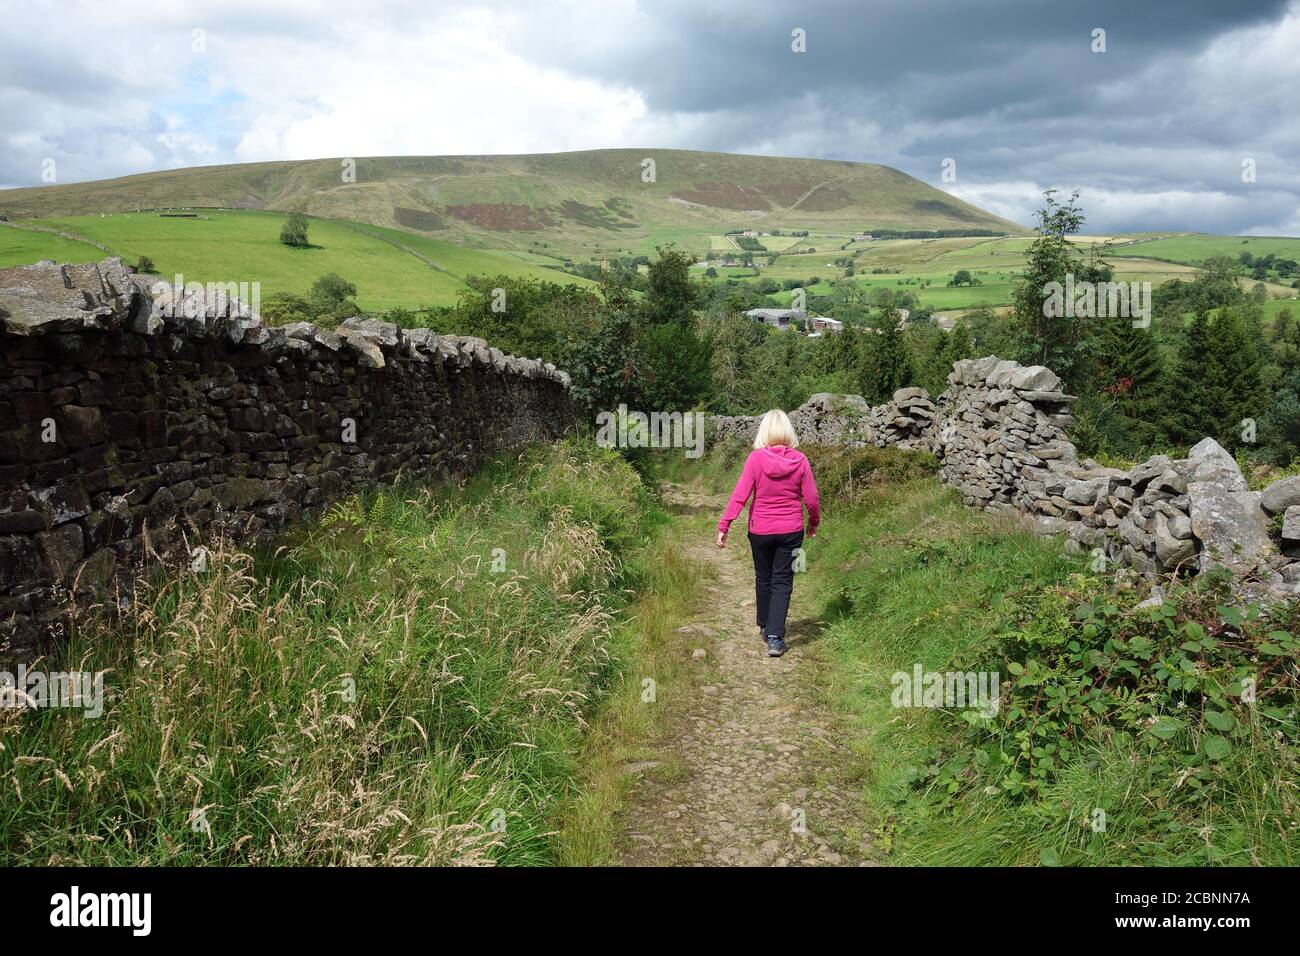 Woman Walking to Pendle Hill on the Old Road to Barley from Roughlee in Pendle, Lancashire, England, UK. Stock Photo